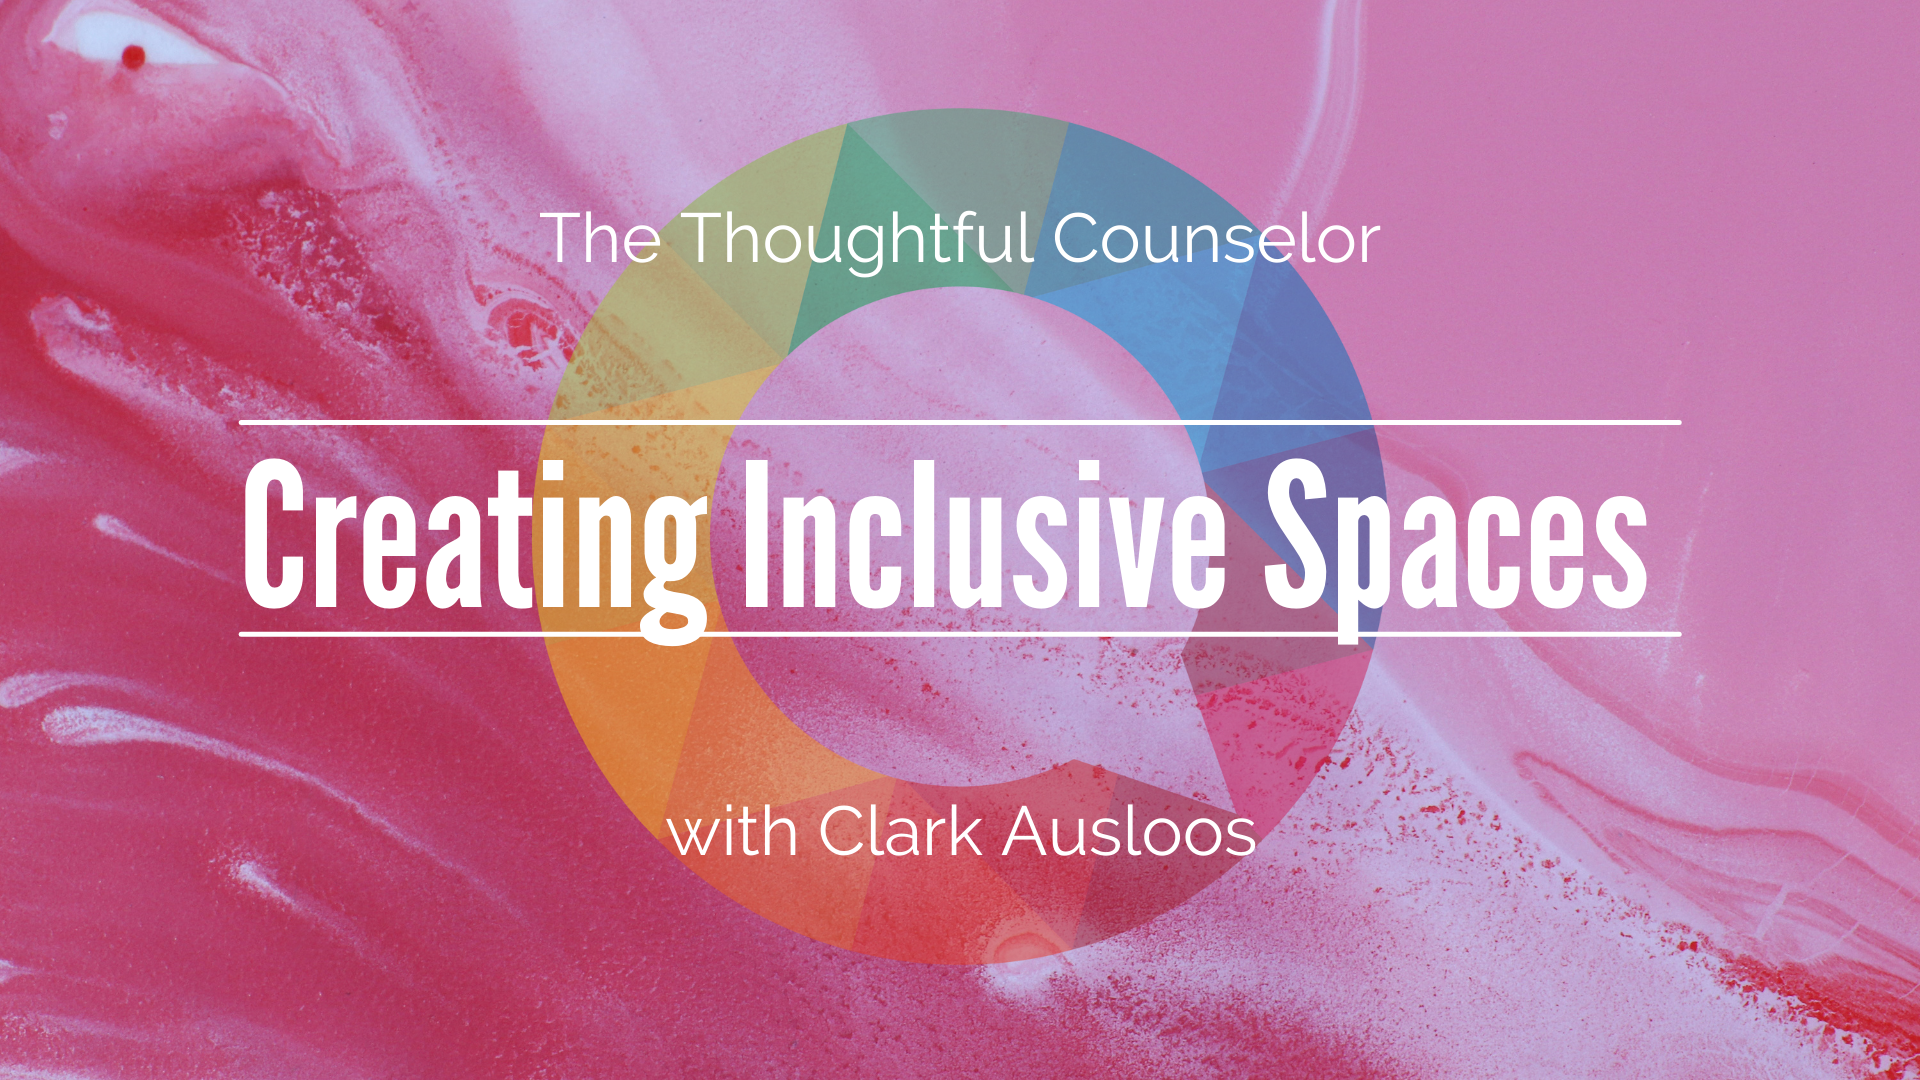 Creating Inclusive Spaces for Transgender and Gender Expansive Young People in K-12 Settings